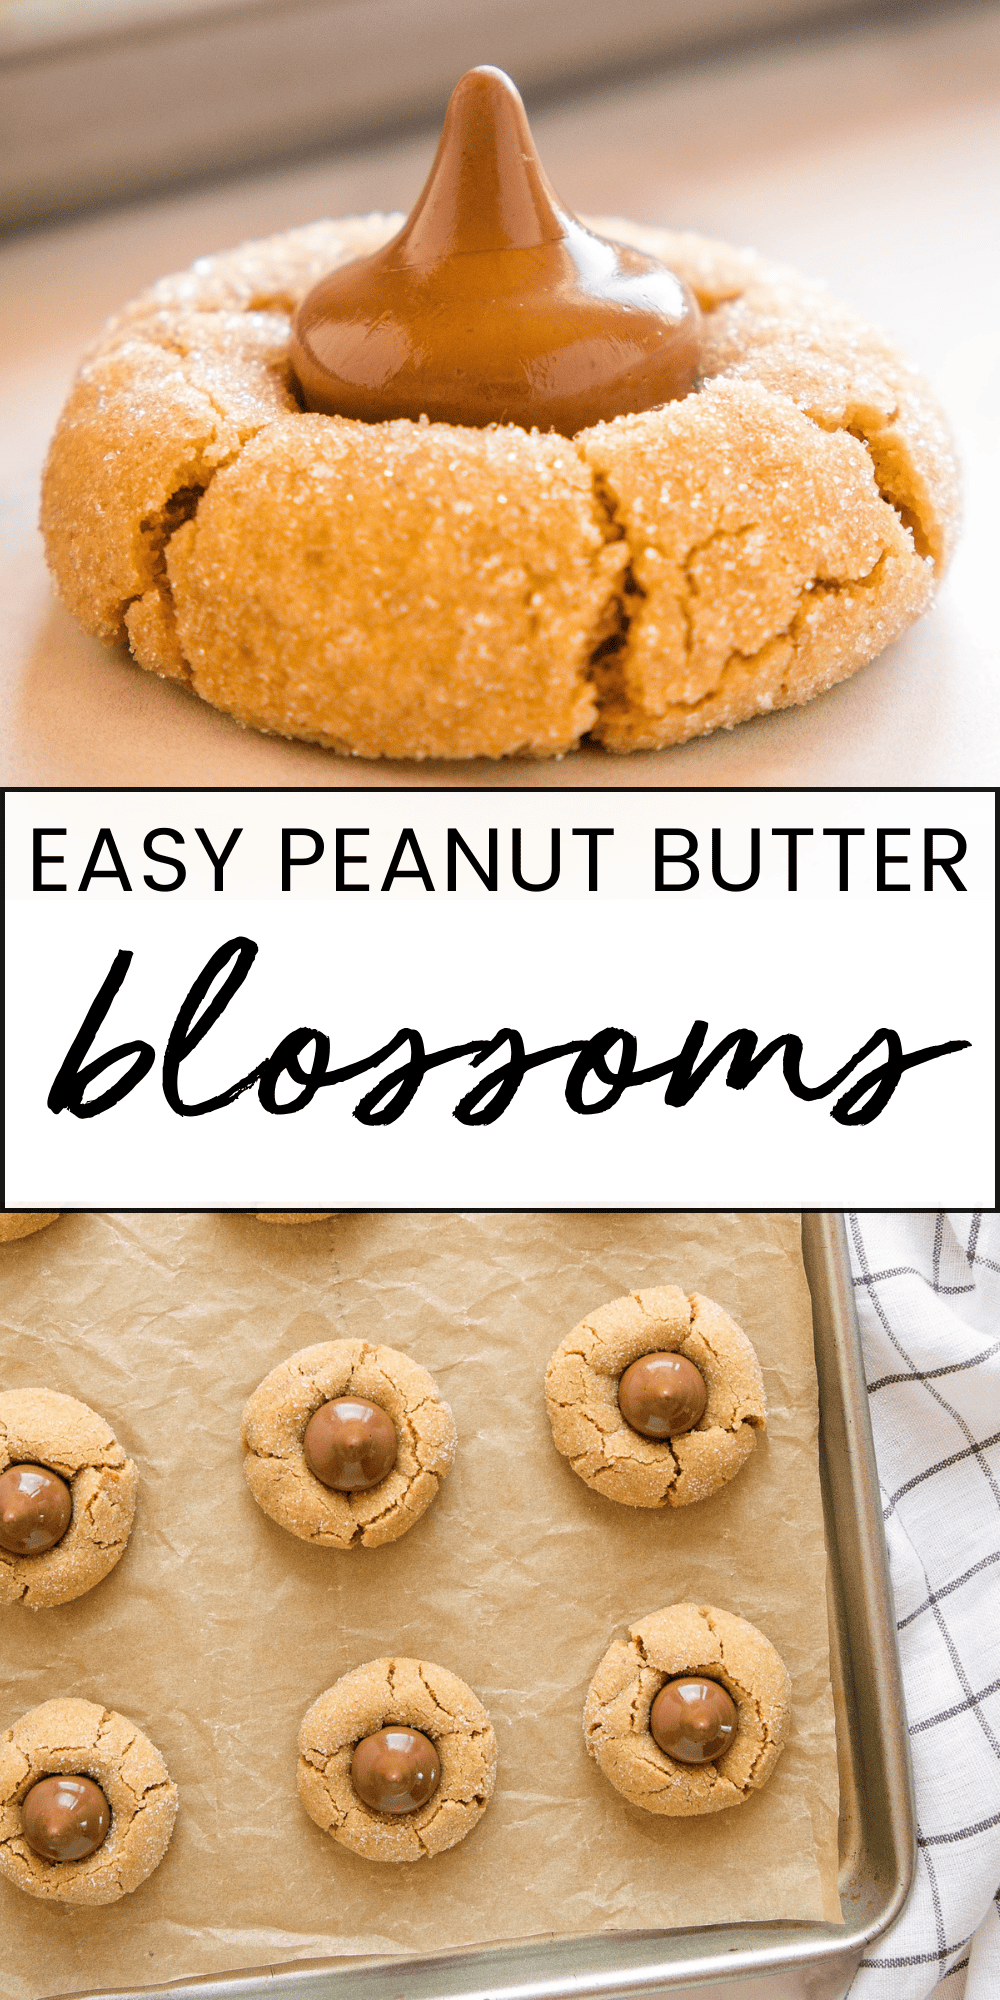 This Peanut Butter Blossoms recipe makes the best classic Christmas cookies! Soft and chewy peanut butter cookies, dipped in sugar, baked to perfection, and topped with milk chocolate. Follow our holiday baking tips for the perfect peanut butter blossom cookies! Recipe from thebusybaker.ca! #peanutbutterblossoms #holidaybaking #christmascookies #peanutbuttercookies #easycookies #howtomakecookies #peanutbutterblossomcookies #peanutbutterblossomsrecipe #peanutbutterblossom via @busybakerblog